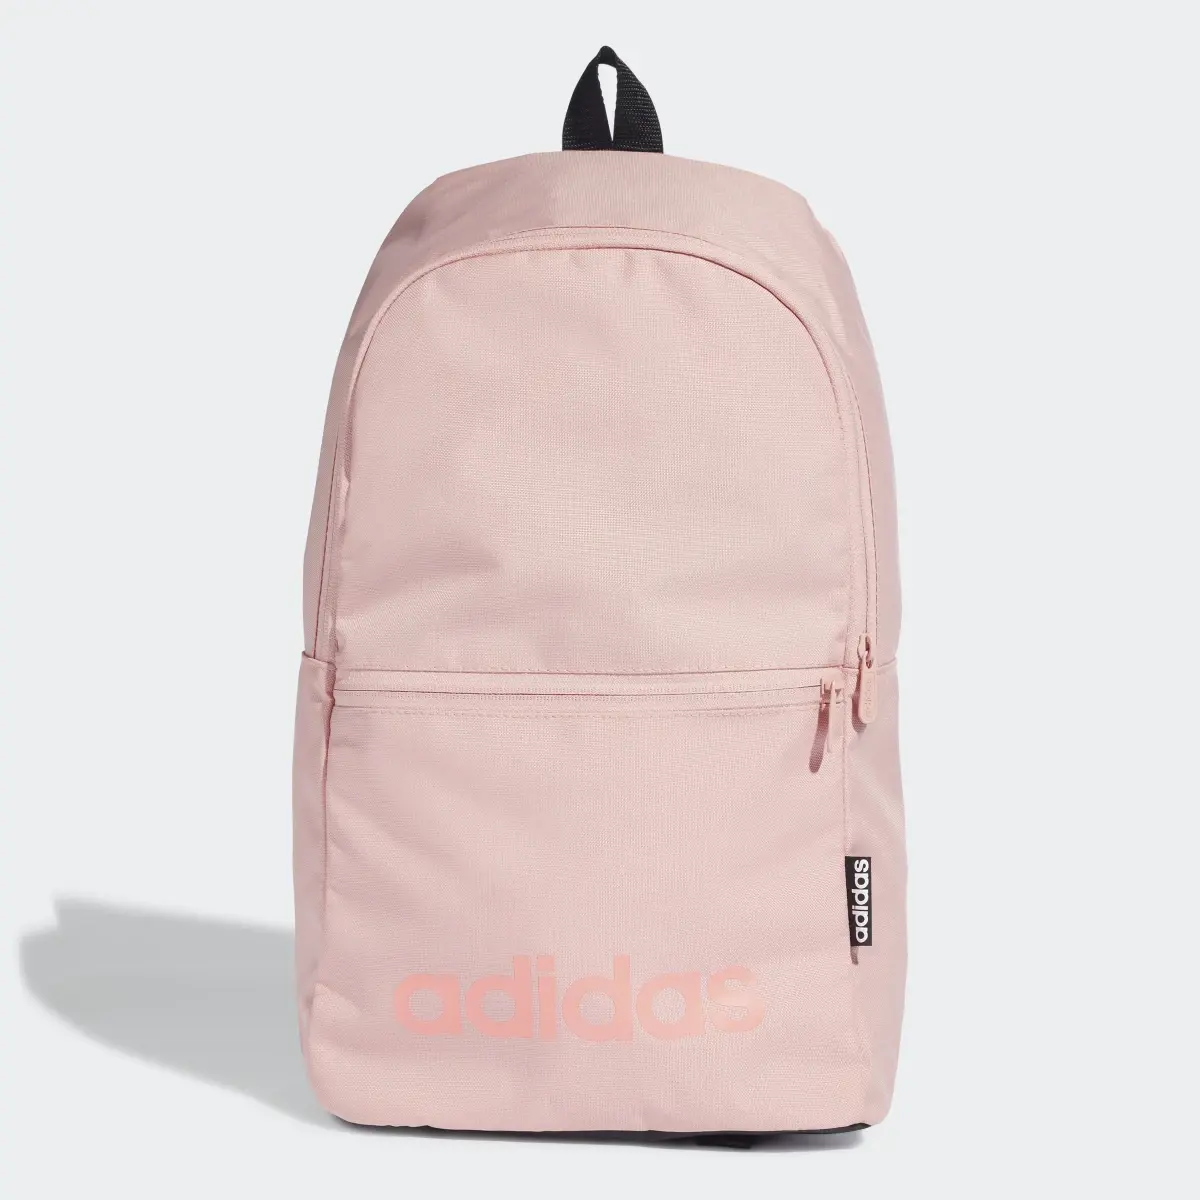 Adidas Linear Classic Daily Rucksack. 1